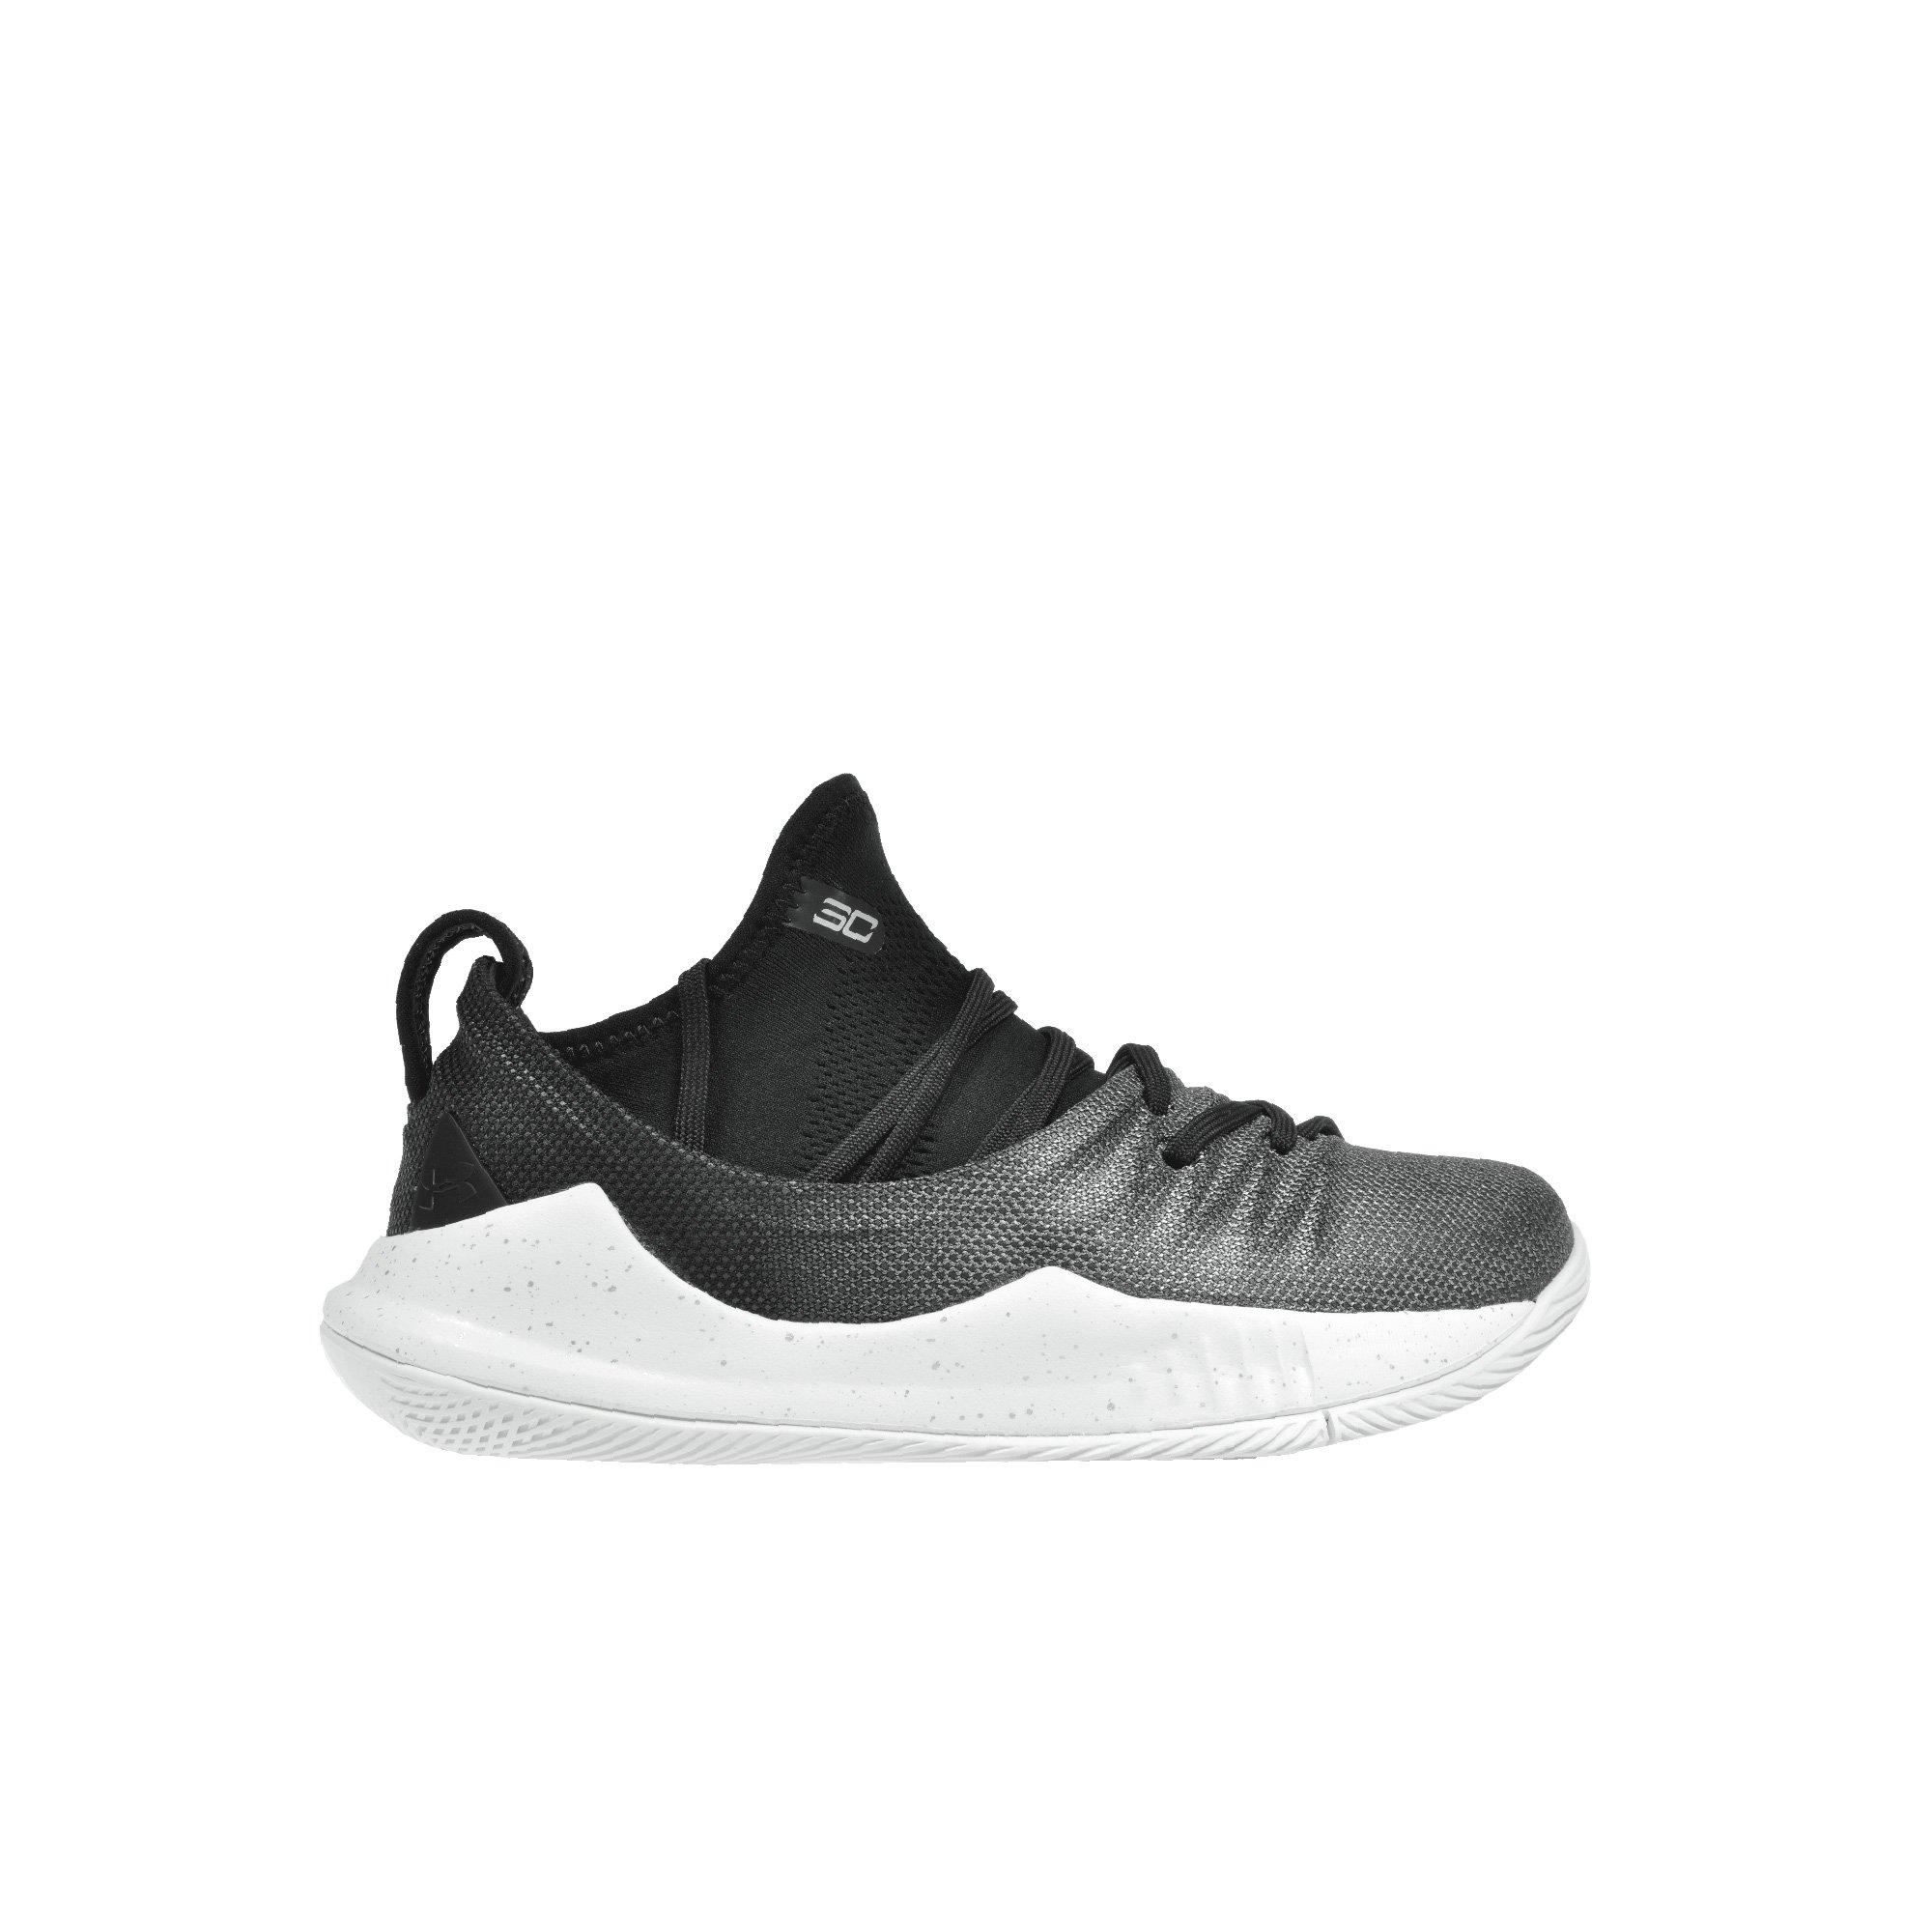 curry 5 shoes youth